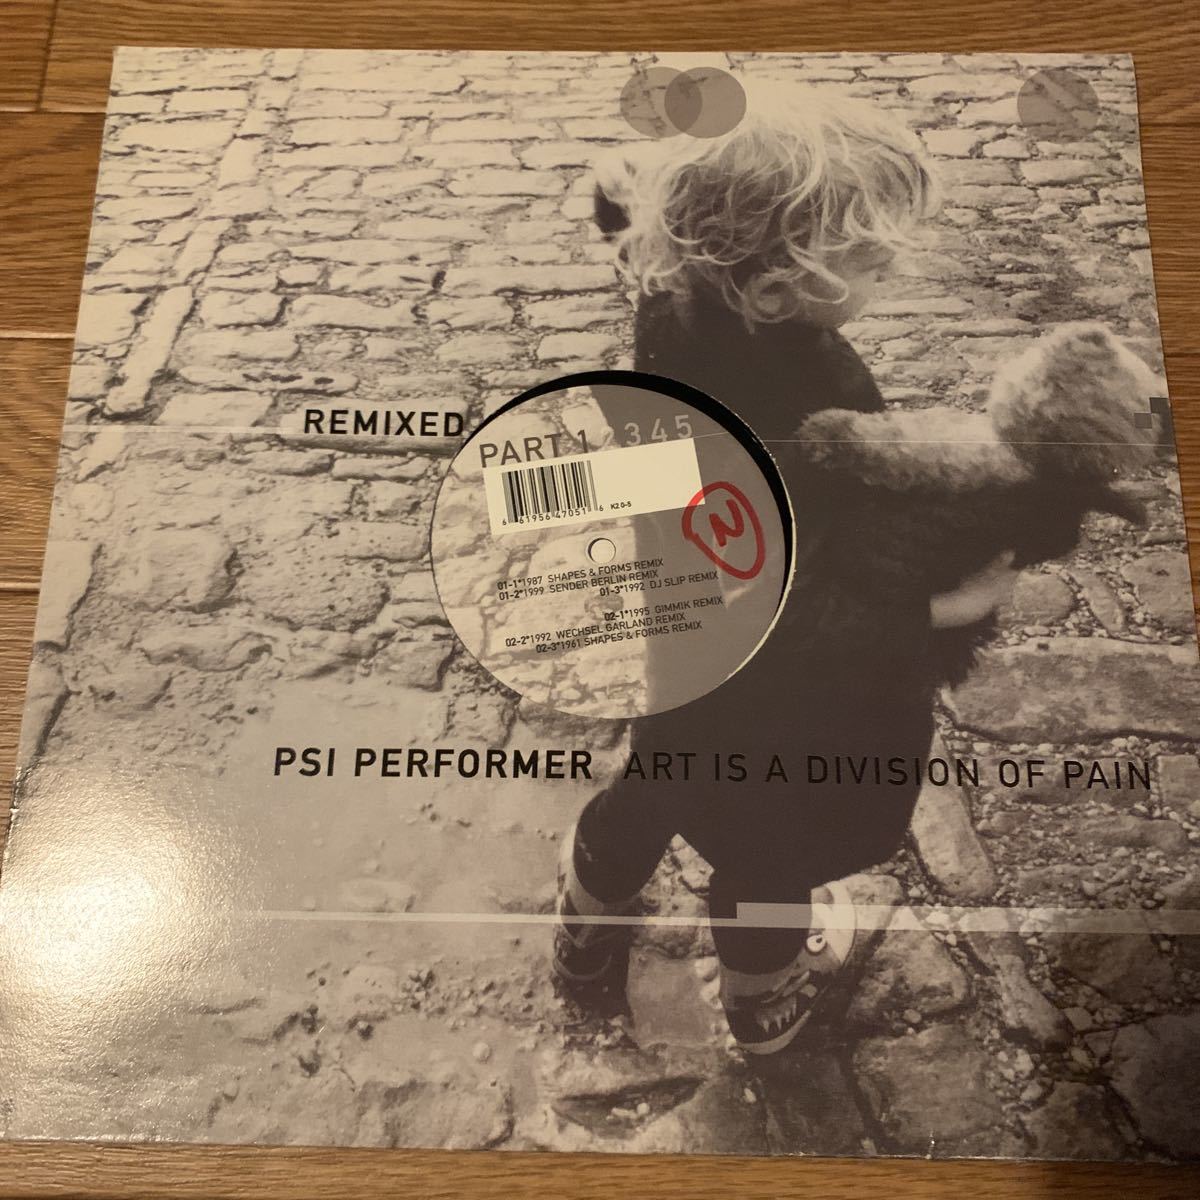 [ Psi Performer - Art Is A Division Of Pain (Remixed Part 1) - K2 O Records K2 O-5 ] Shapes & Forms , Sender Berlin , DJ Slip_画像3